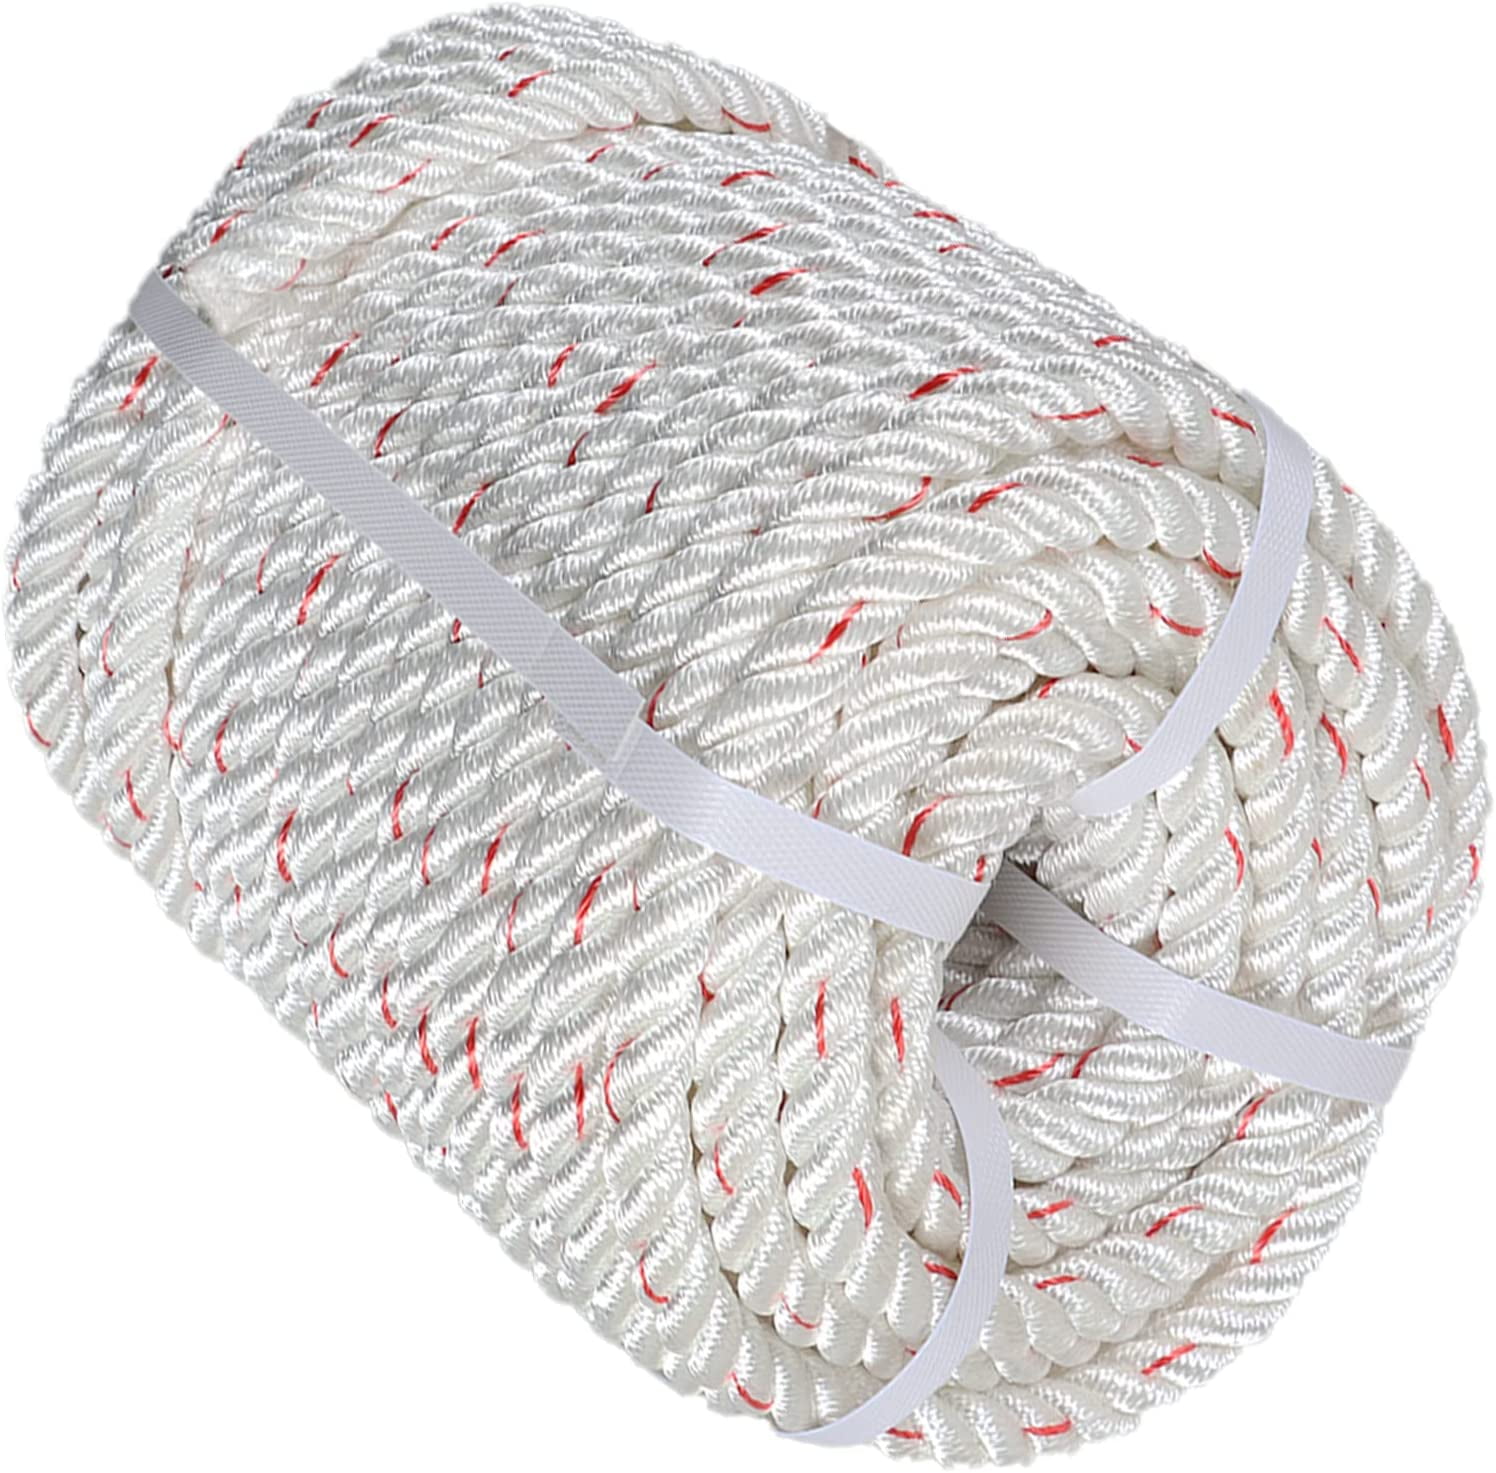 100m 5mm 7-core Camping Tent Fix 7-core Camping Tent Fix Weaving Binding  Umbrella Rope Braided Cord Home Outdoor Lifeline 